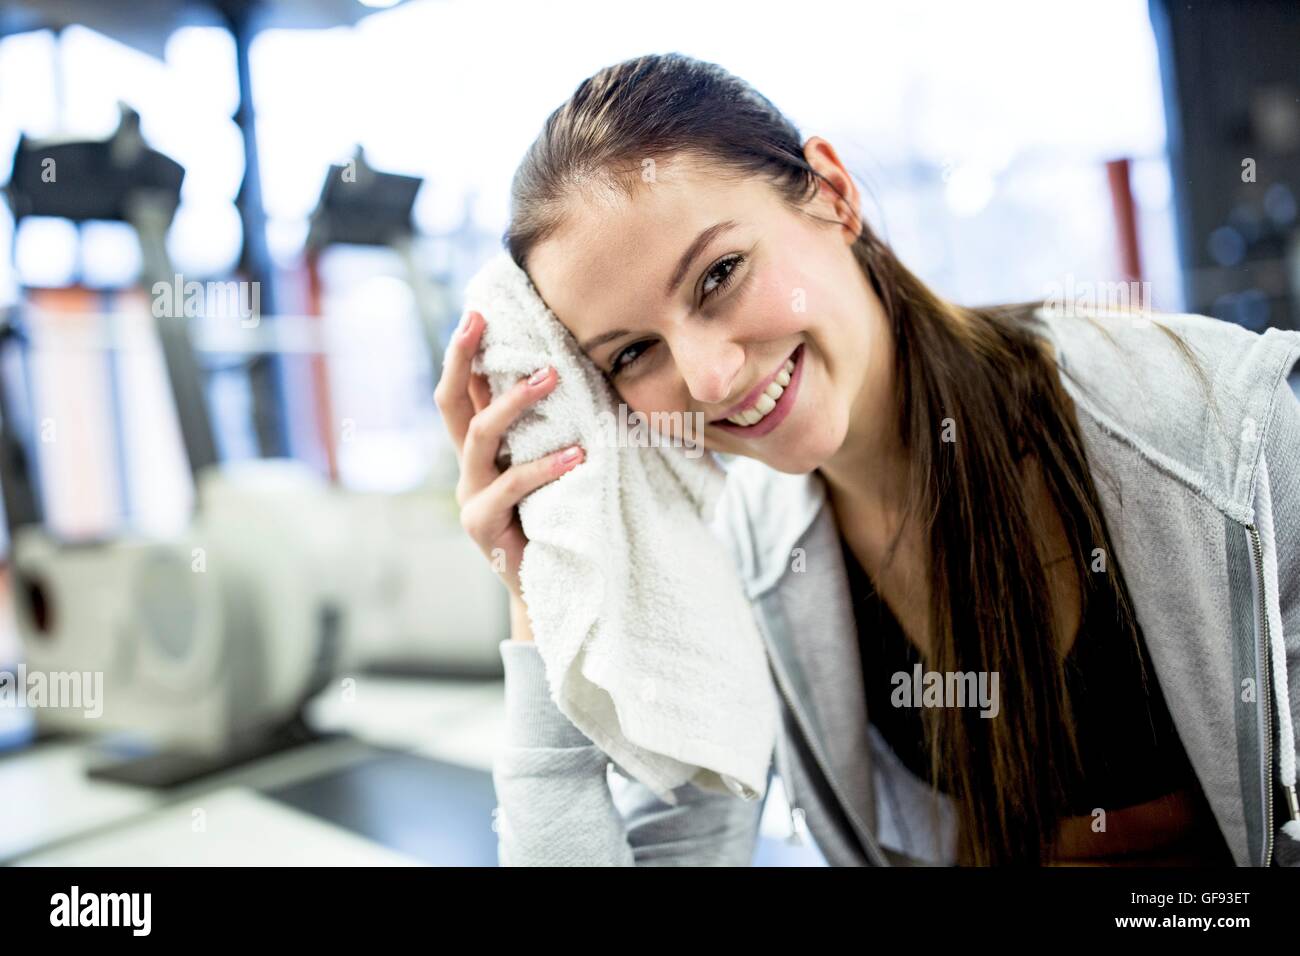 PROPERTY RELEASED. MODEL RELEASED. Portrait young woman wiping her sweat after workout in gym. Stock Photo